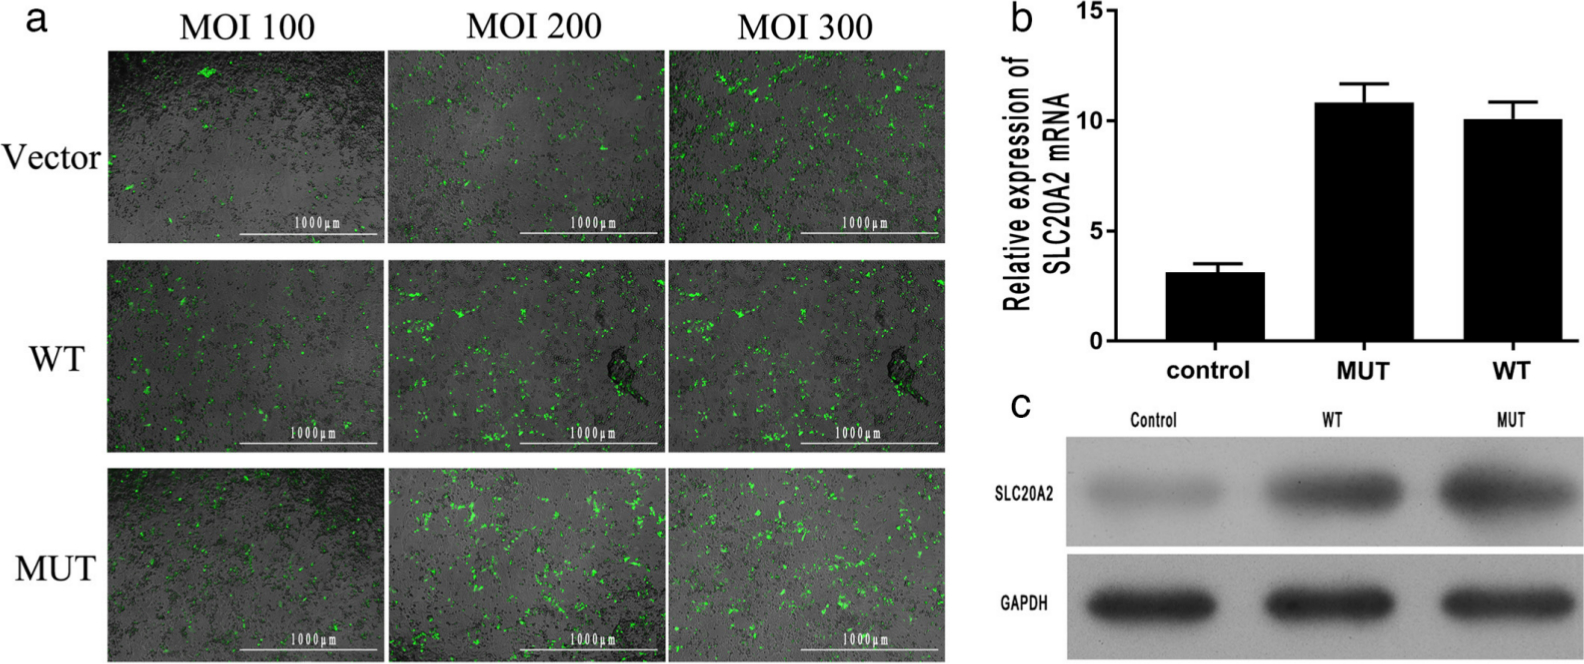 Fig. 2 
            a) An immunofluorescence examination (magnification: 40×) was performed to determine the transfection efficiency of the cell lines. Three different quantities of pcDNA3.0 plasmids were used to achieve the multiplicity of infection (MOI) of 100, 200, and 300. The results indicate that all the cell lines with a MOI of 300 had the best transfection efficiency (the green fluorescence shows the transfected plasmids). Scale bar = 1,000 μm. b) and c) Expression of solute carrier family 20 member 2 (SLC20A2), as determined by b) quantitative real-time polymerase chain reaction (qRT-PCR) and c) western blot. There was no significant difference in SLC20A2 expression level between the wild-type (WT) and mutant (MUT) groups. GAPDH, glyceraldehyde 3-phosphate dehydrogenase; mRNA, messenger RNA.
          